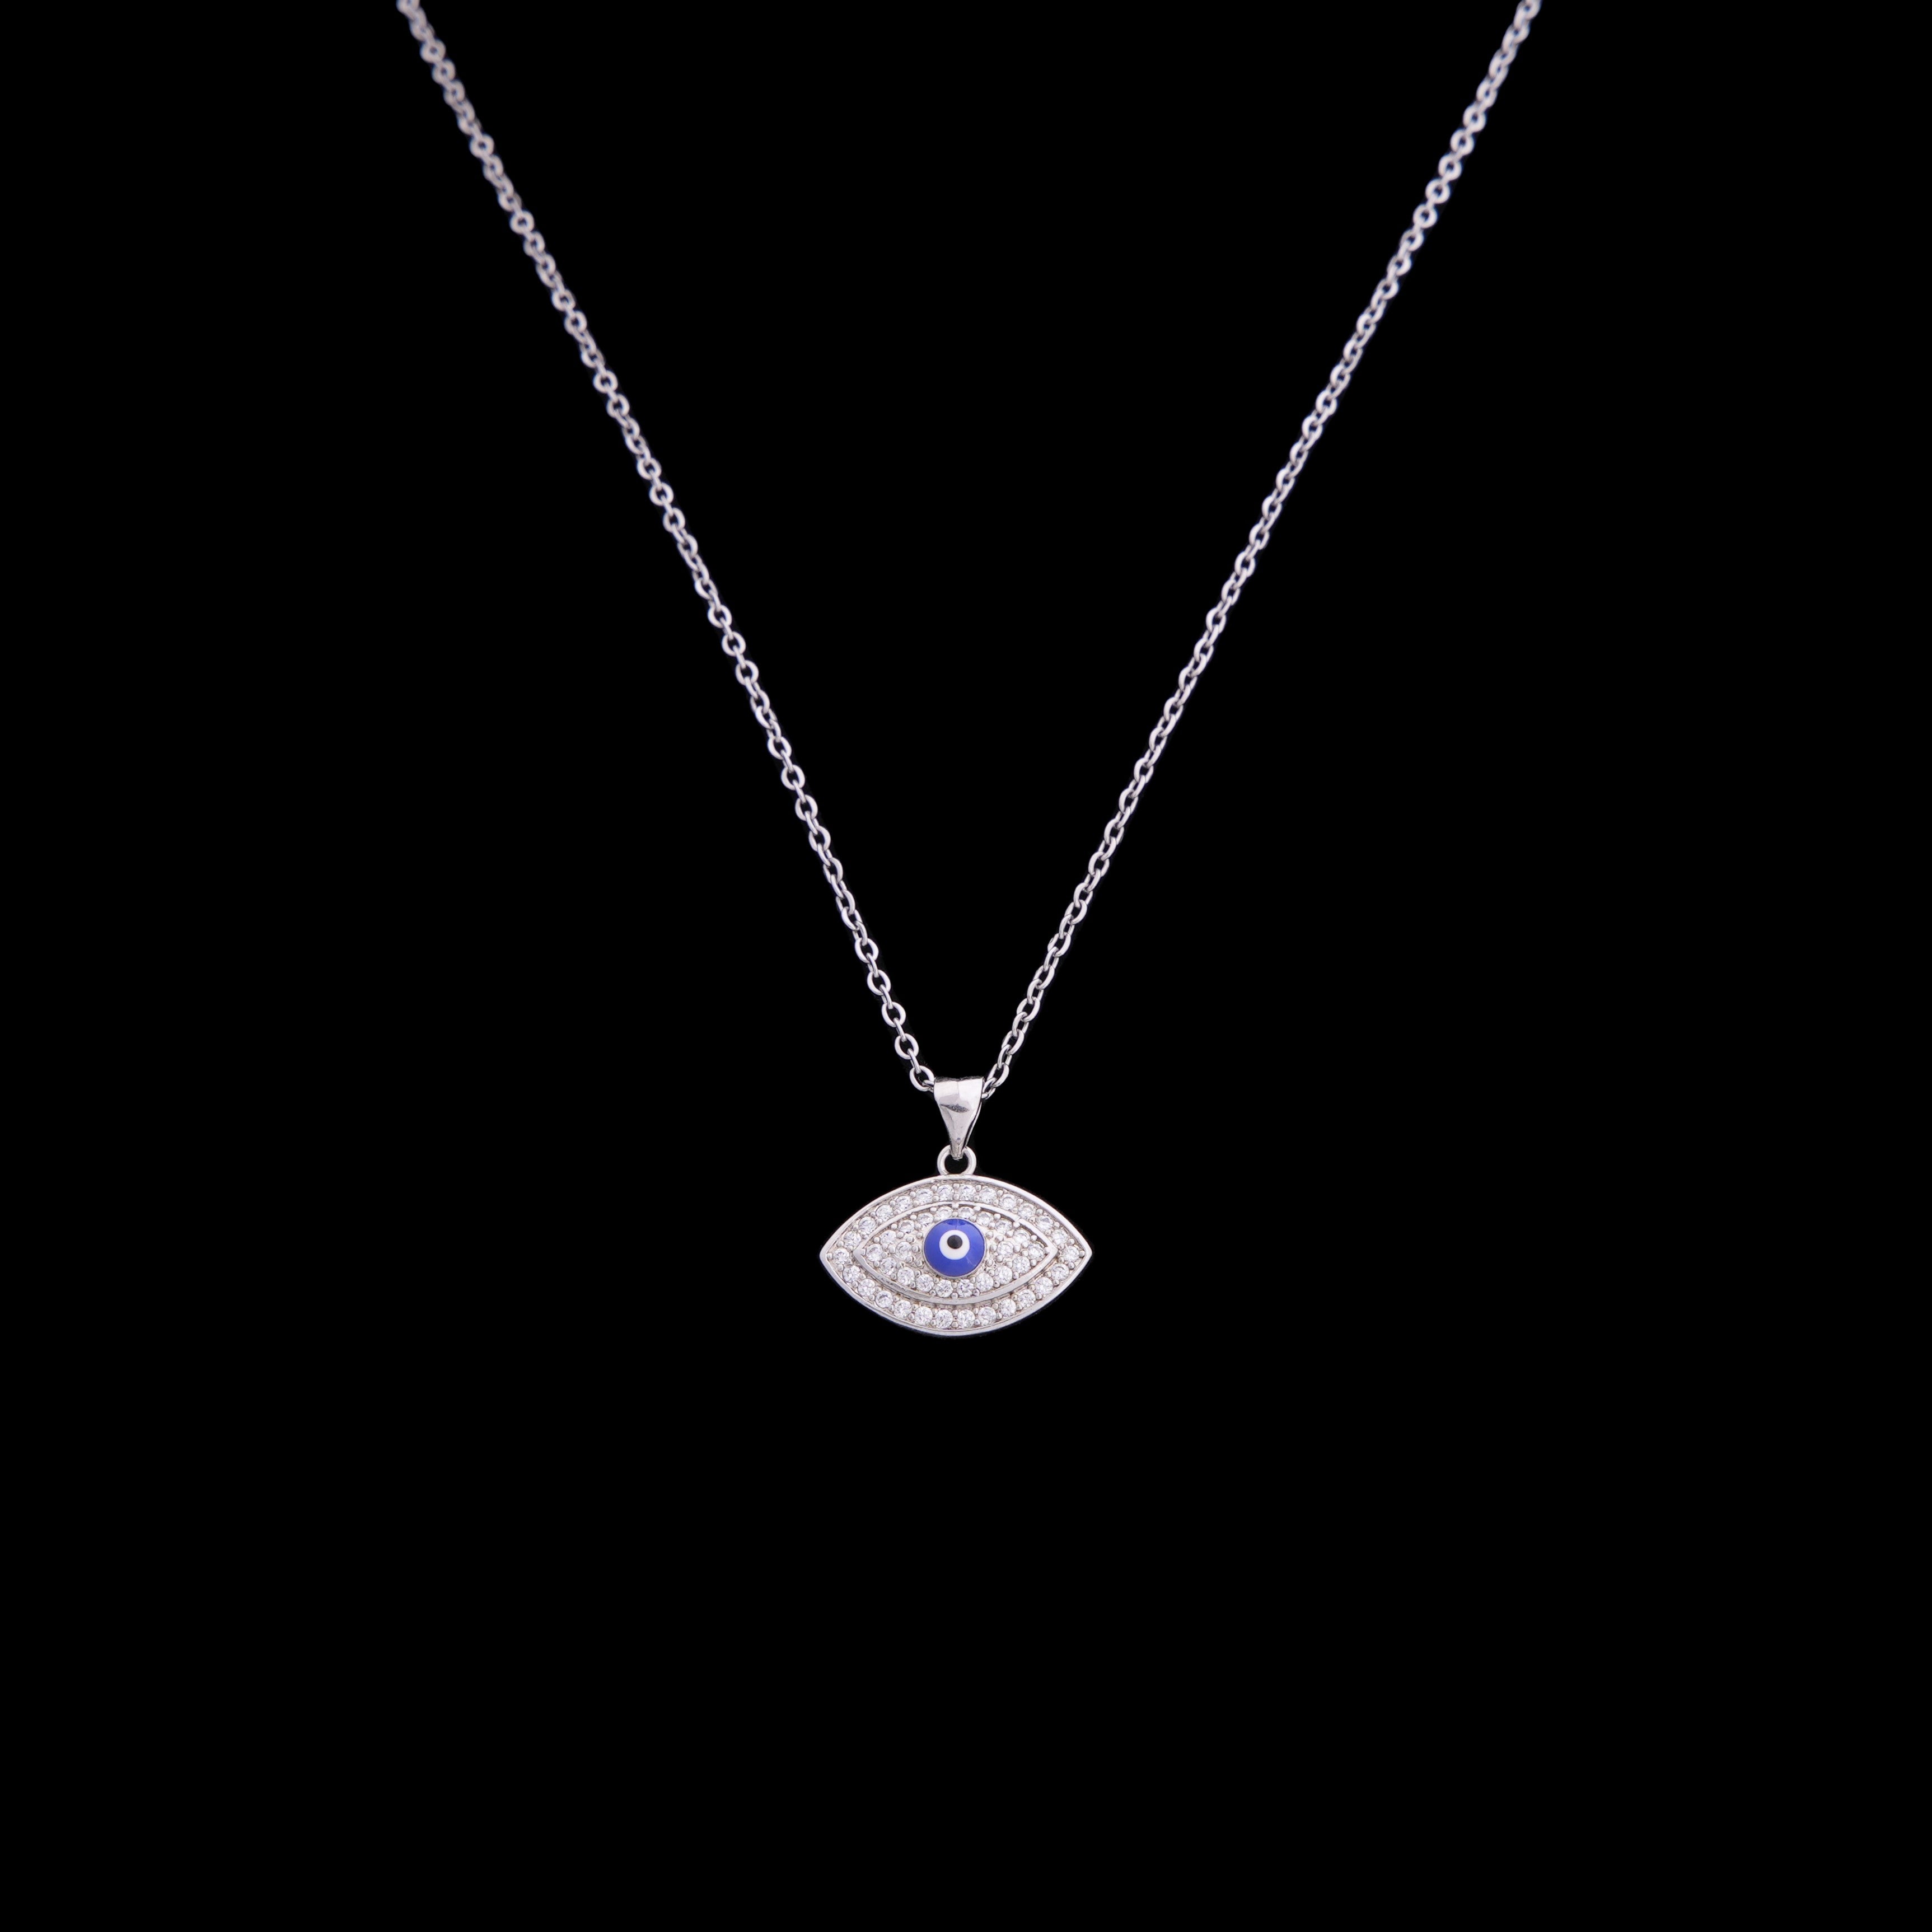 Buy Reiki Crystal Products Evil Eye Pendant with Earrings, Blue Turkish Evil  Eye Pendant, Black Thread Evil Eye Pendant Necklace for Women Men Lucky  Protection, at Amazon.in